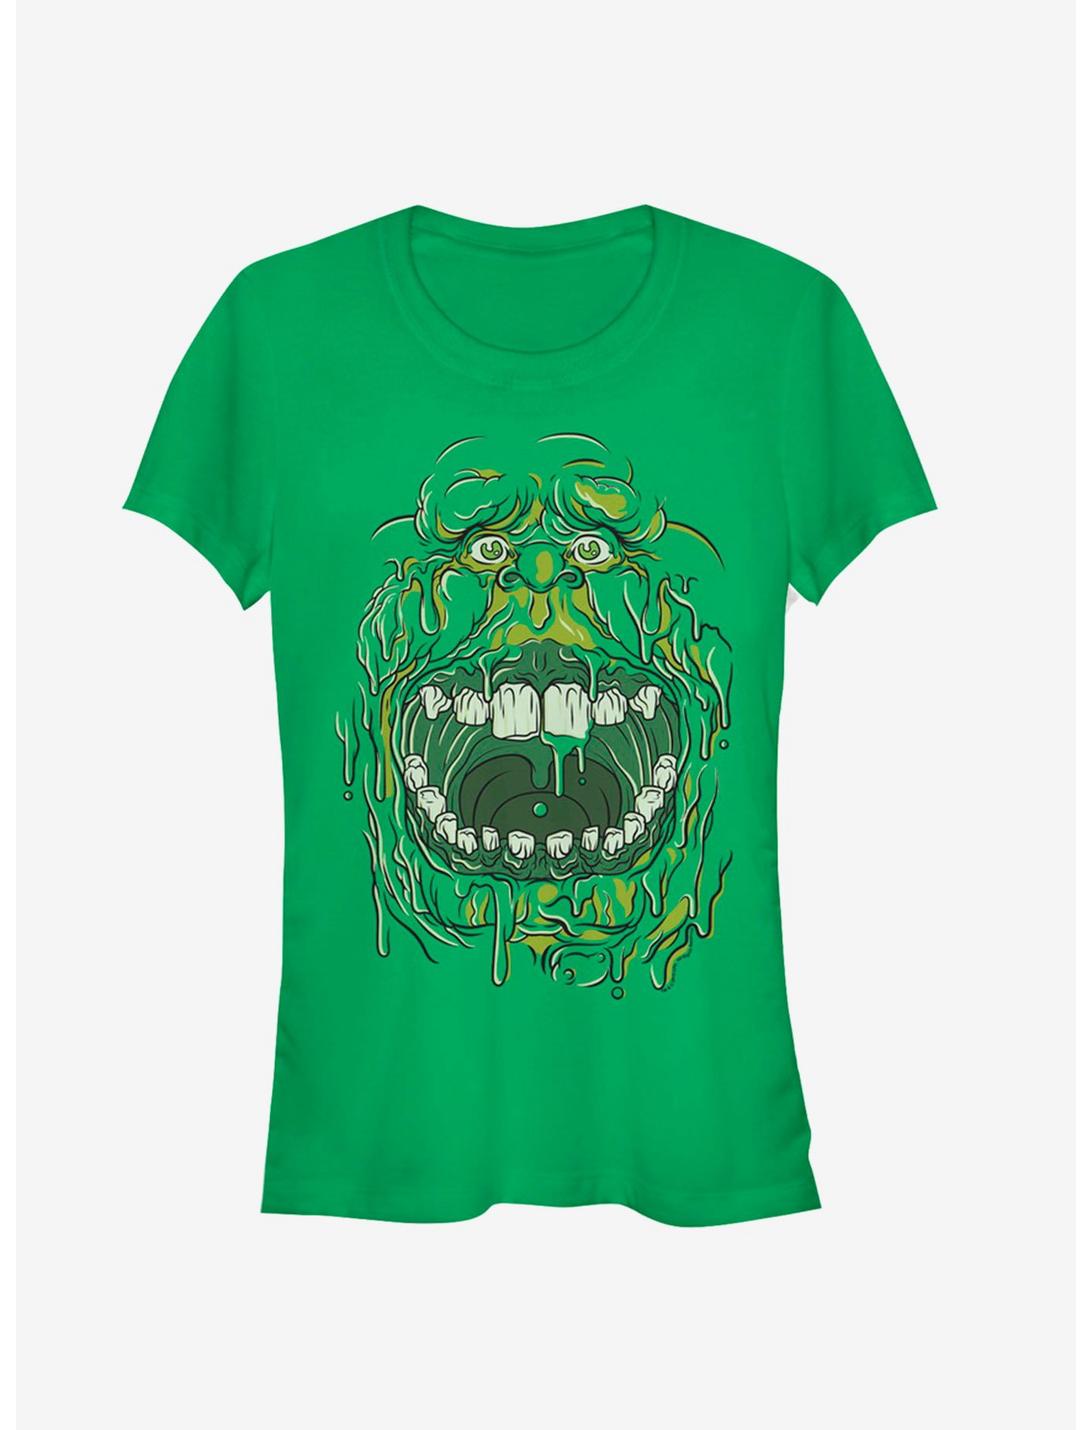 Ghostbusters Slimer Face Costume Girls T-Shirt, KELLY, hi-res